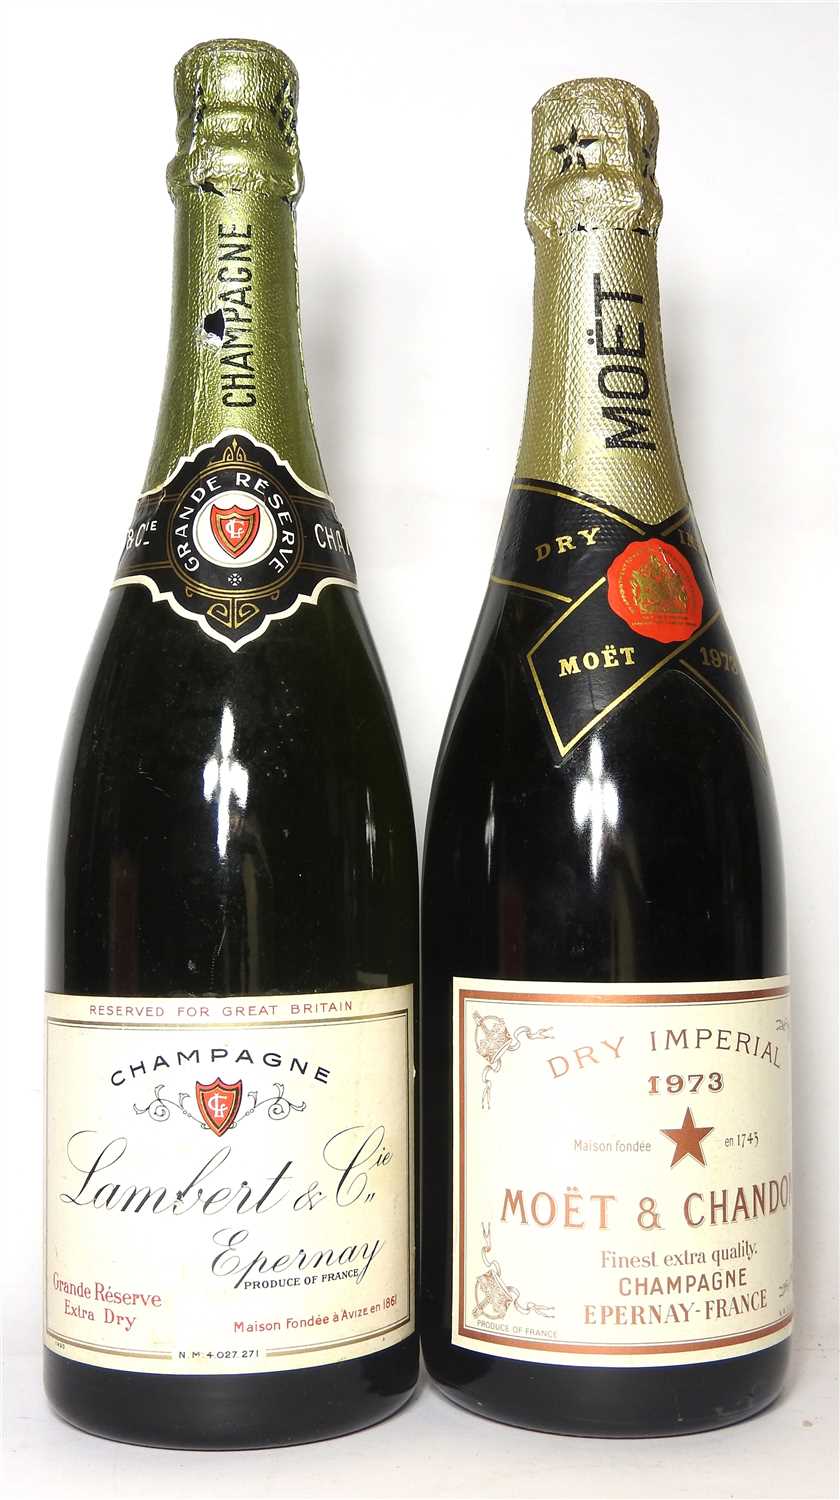 Lot 50 - Moët & Chandon, 1973, one bottle and Lambert & Cie, Extra Dry, one bottle, two bottles in total